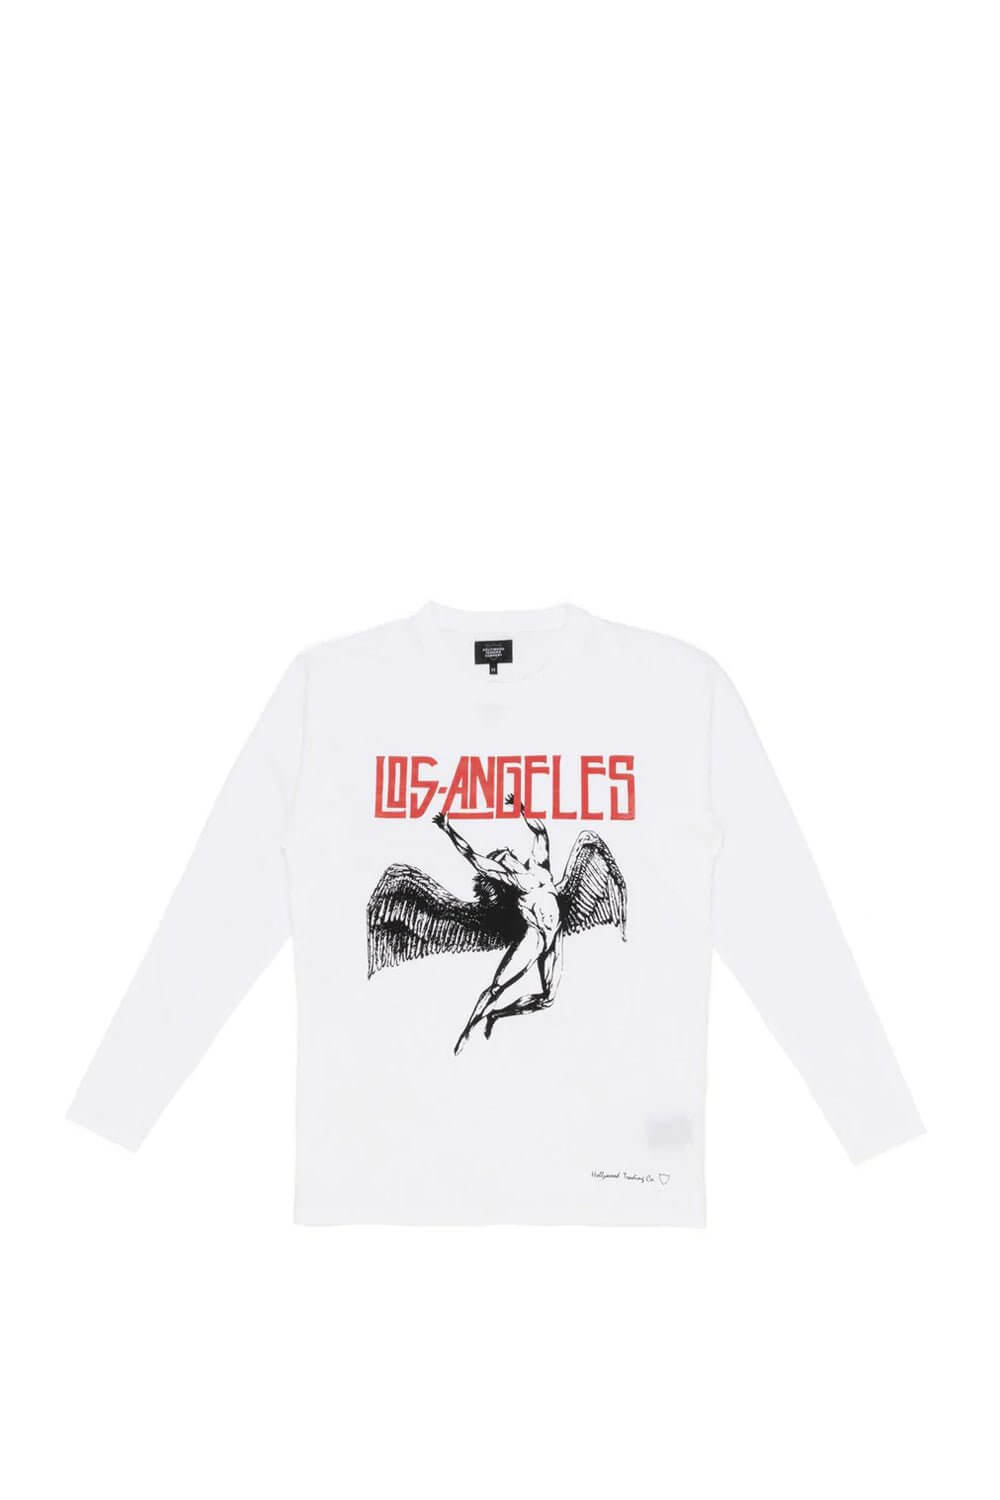 ICARUS LS T-SHIRT Regular fit long sleeve t-shirt printed on the front. HTC LOS ANGELES